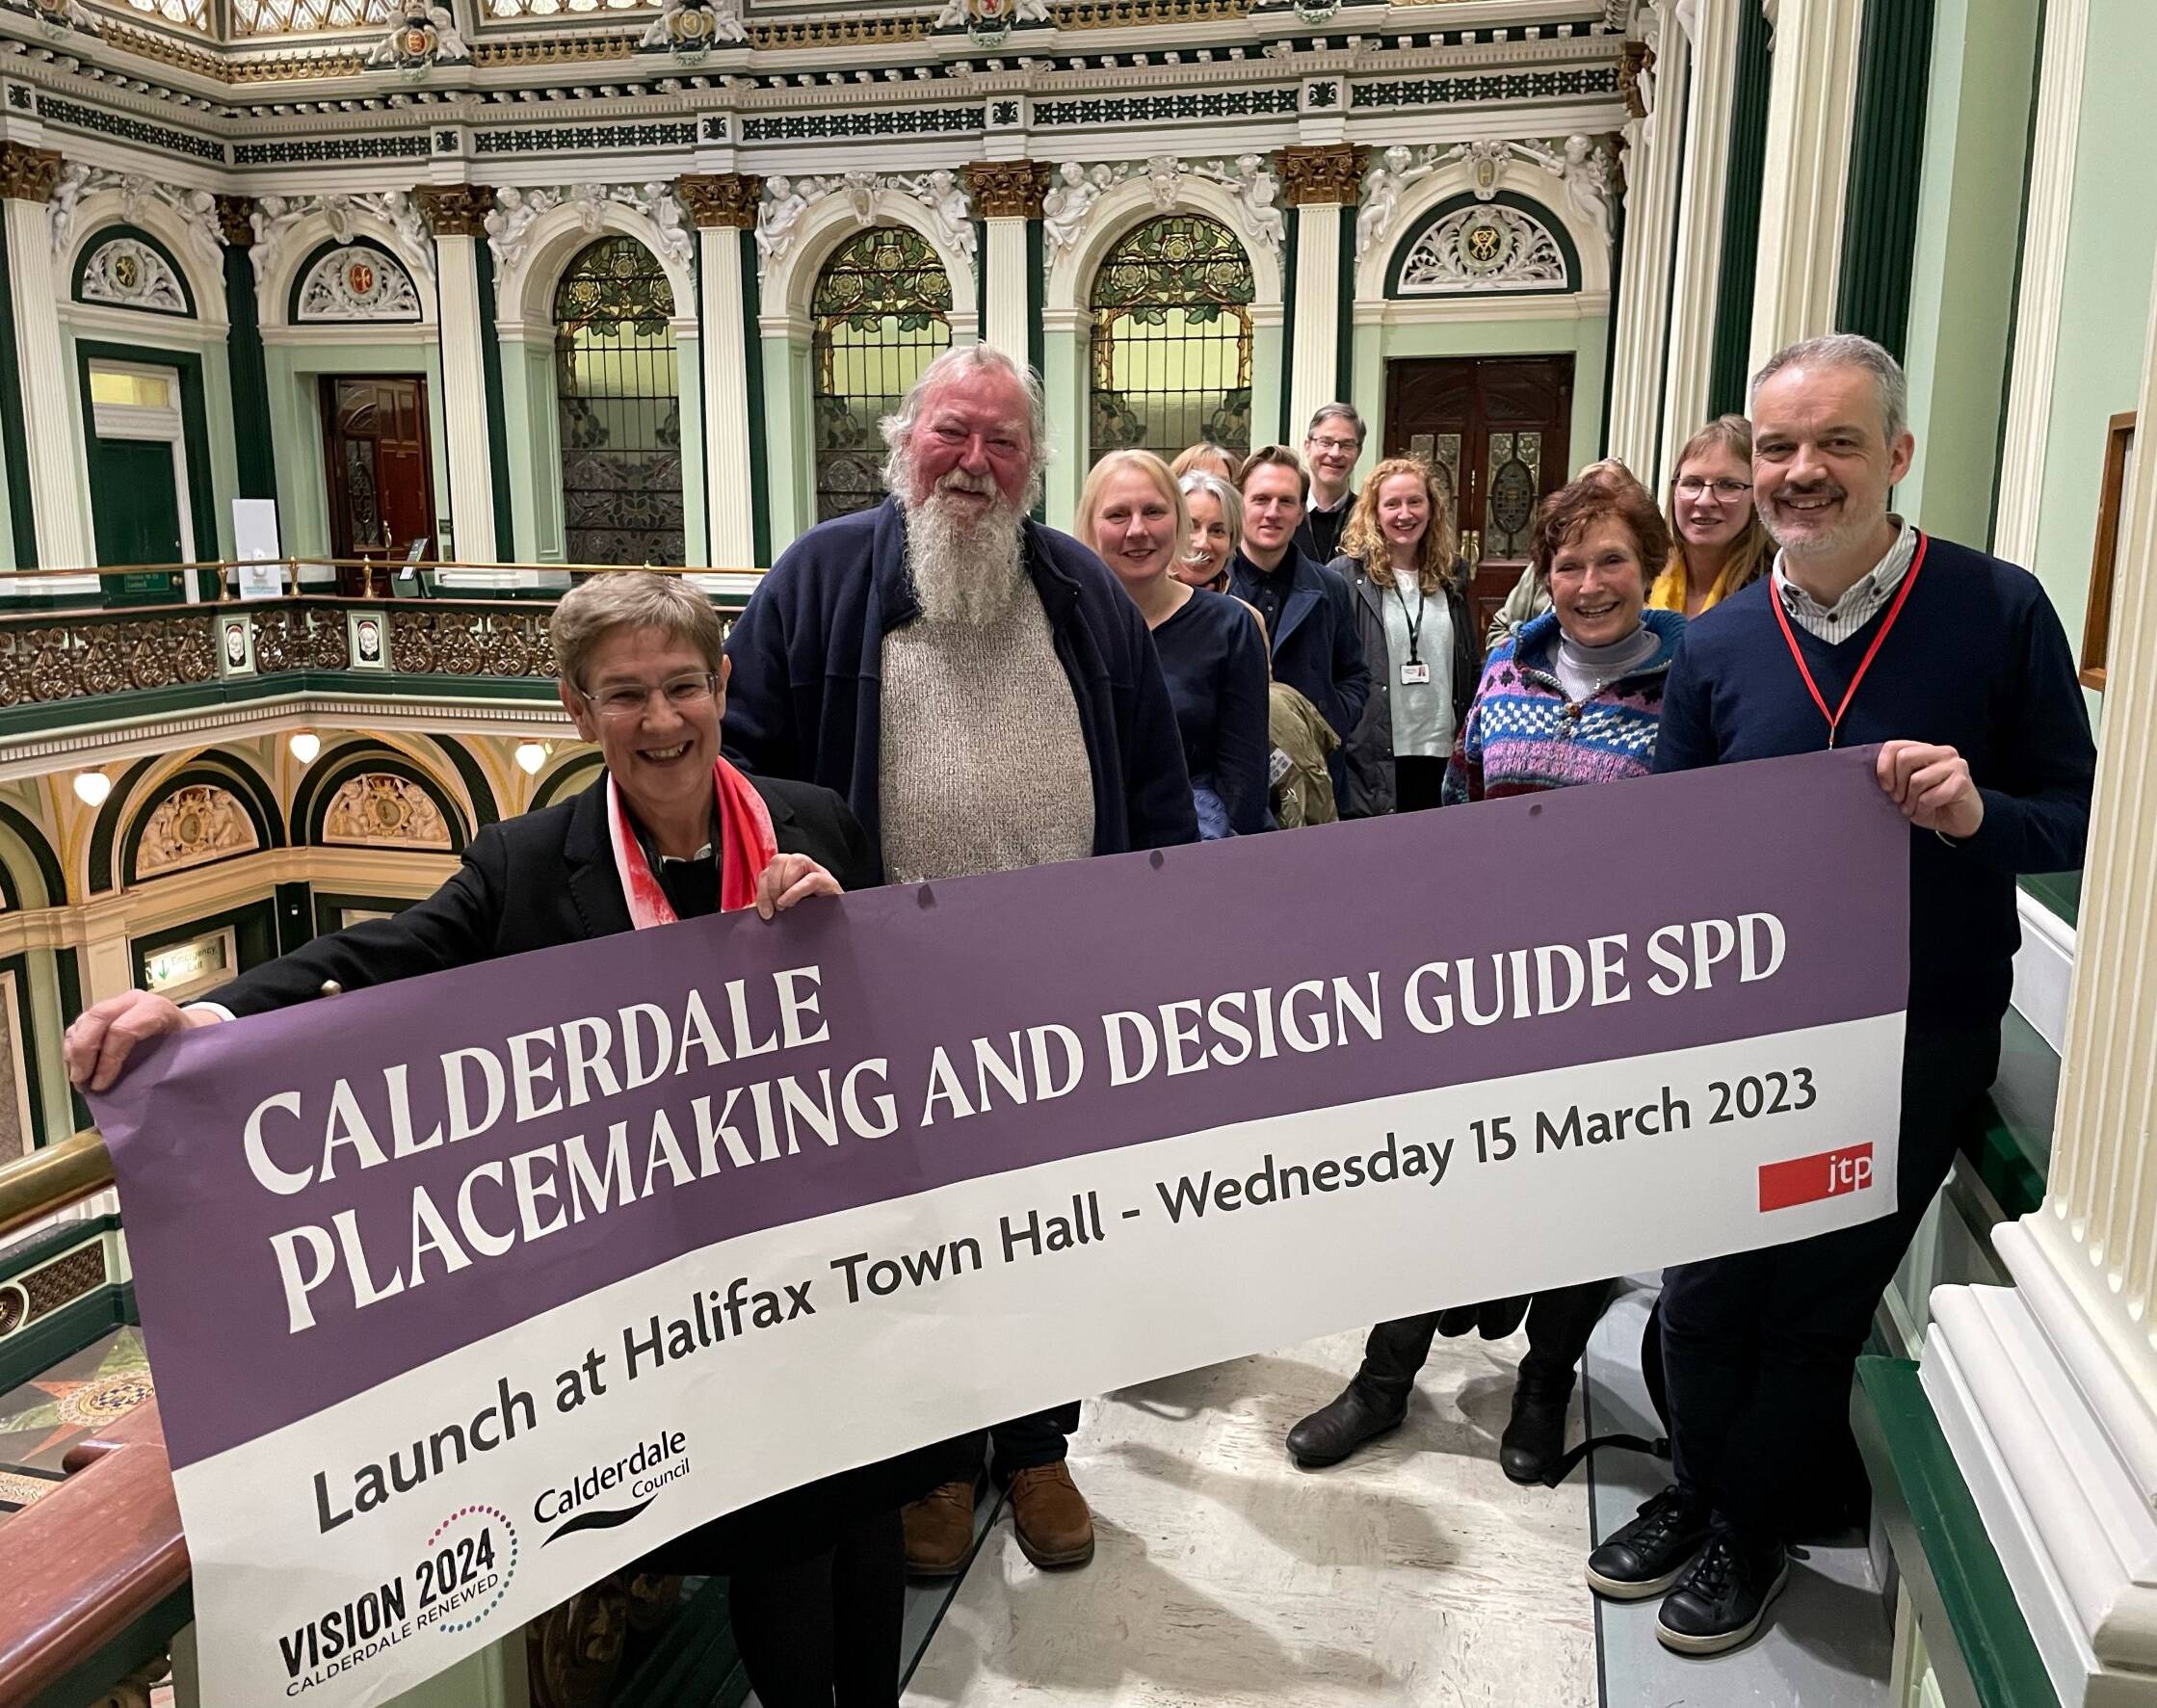 Launch of Calderdale Placemaking and Design Guide